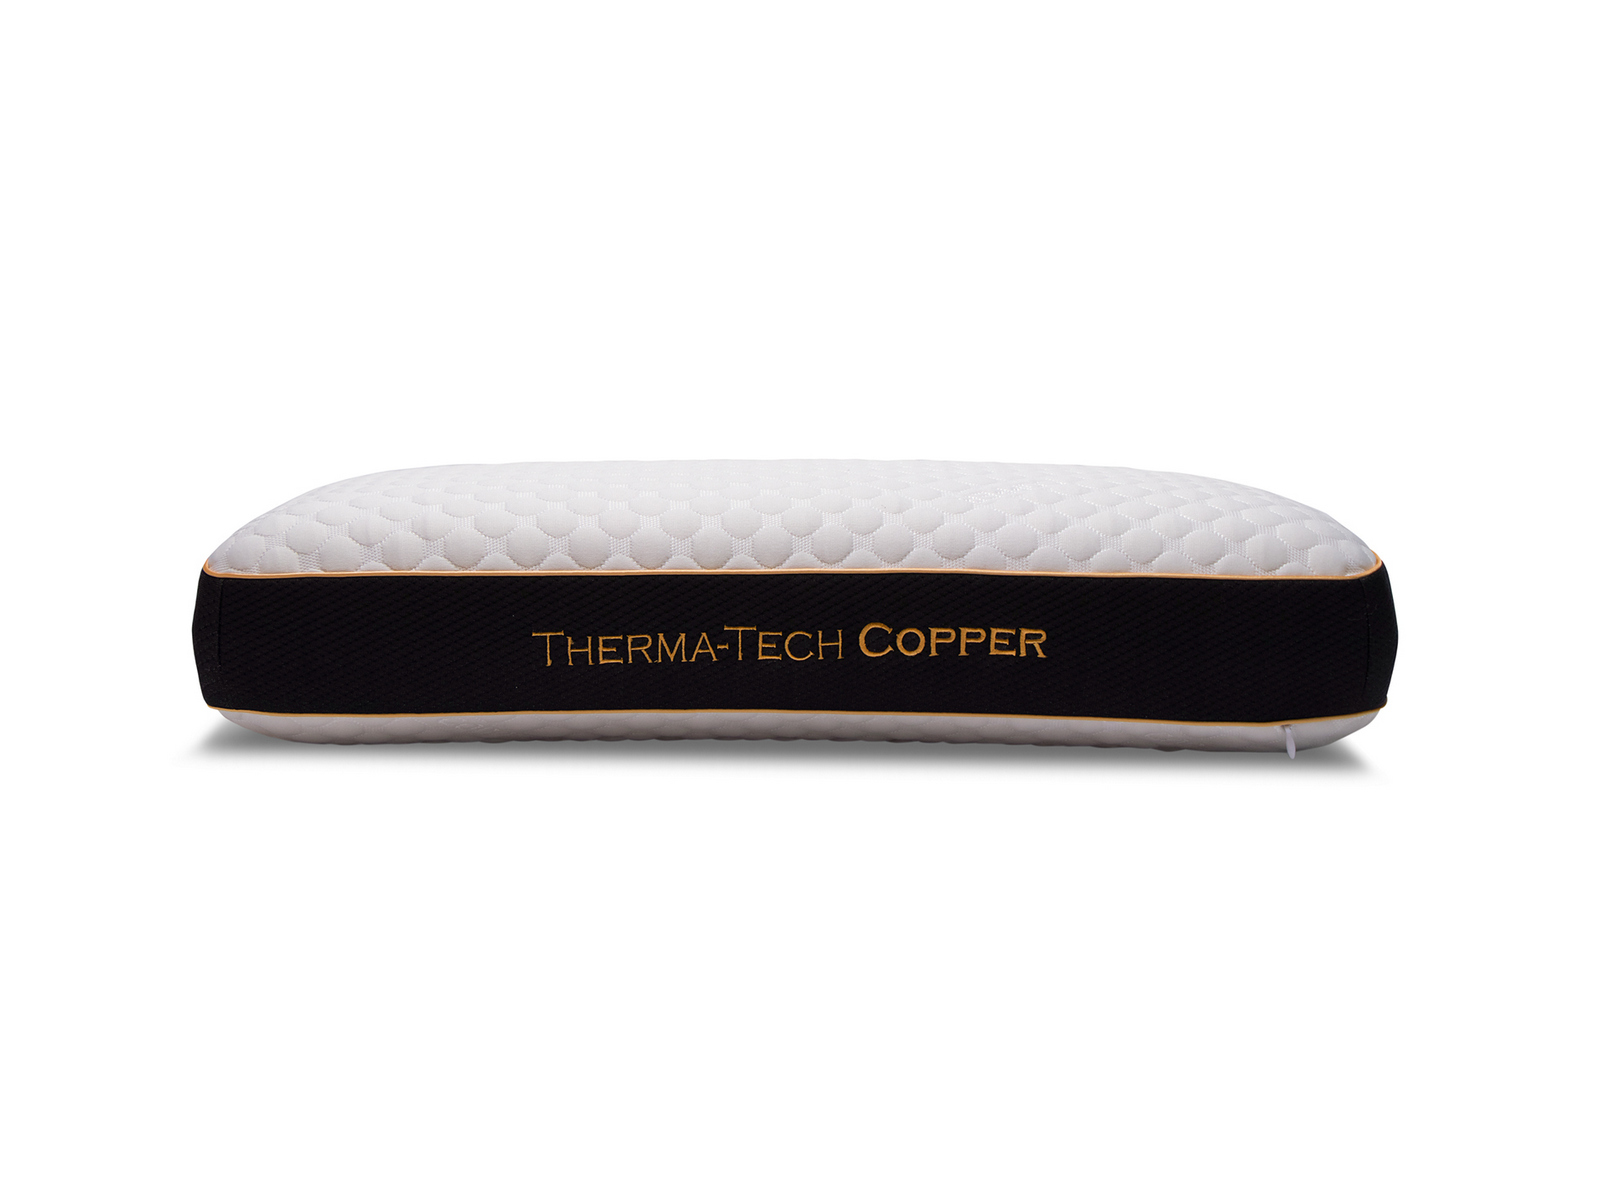 Healthy Sleep King Therma-Tech Copper Pillow | 4.75 Low Profile